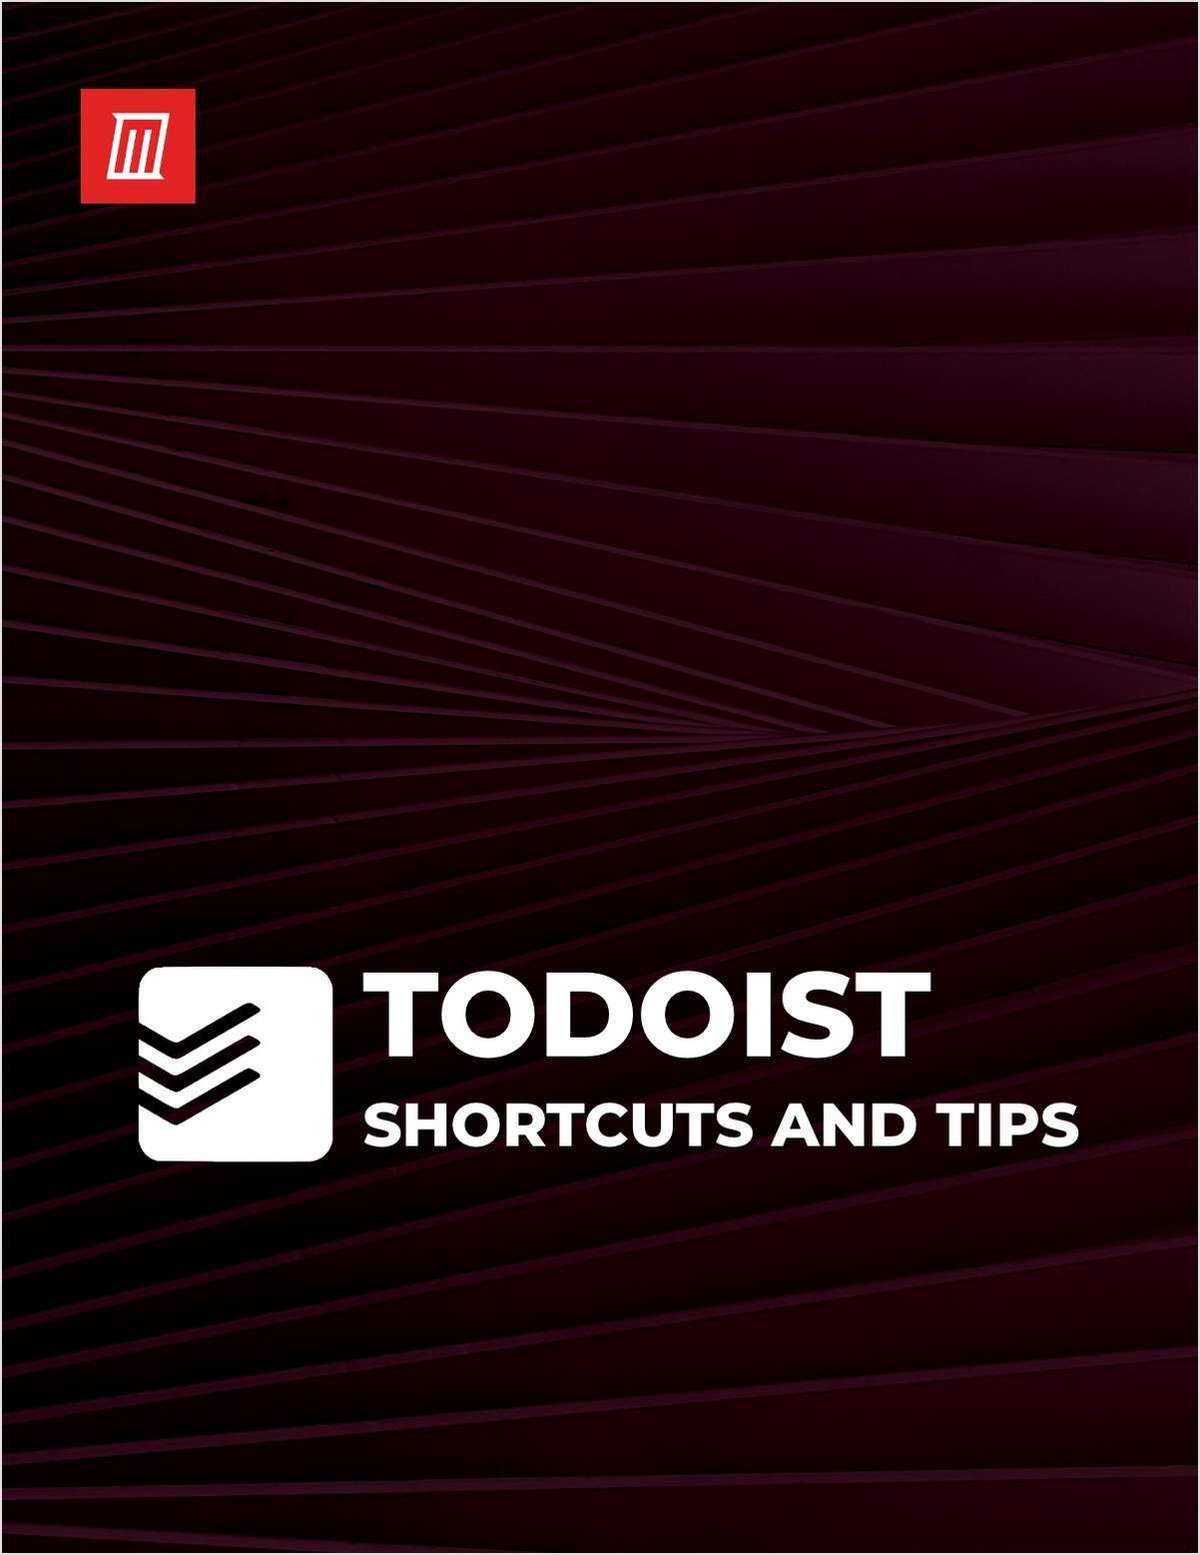 Todoist Shortcuts and Tips